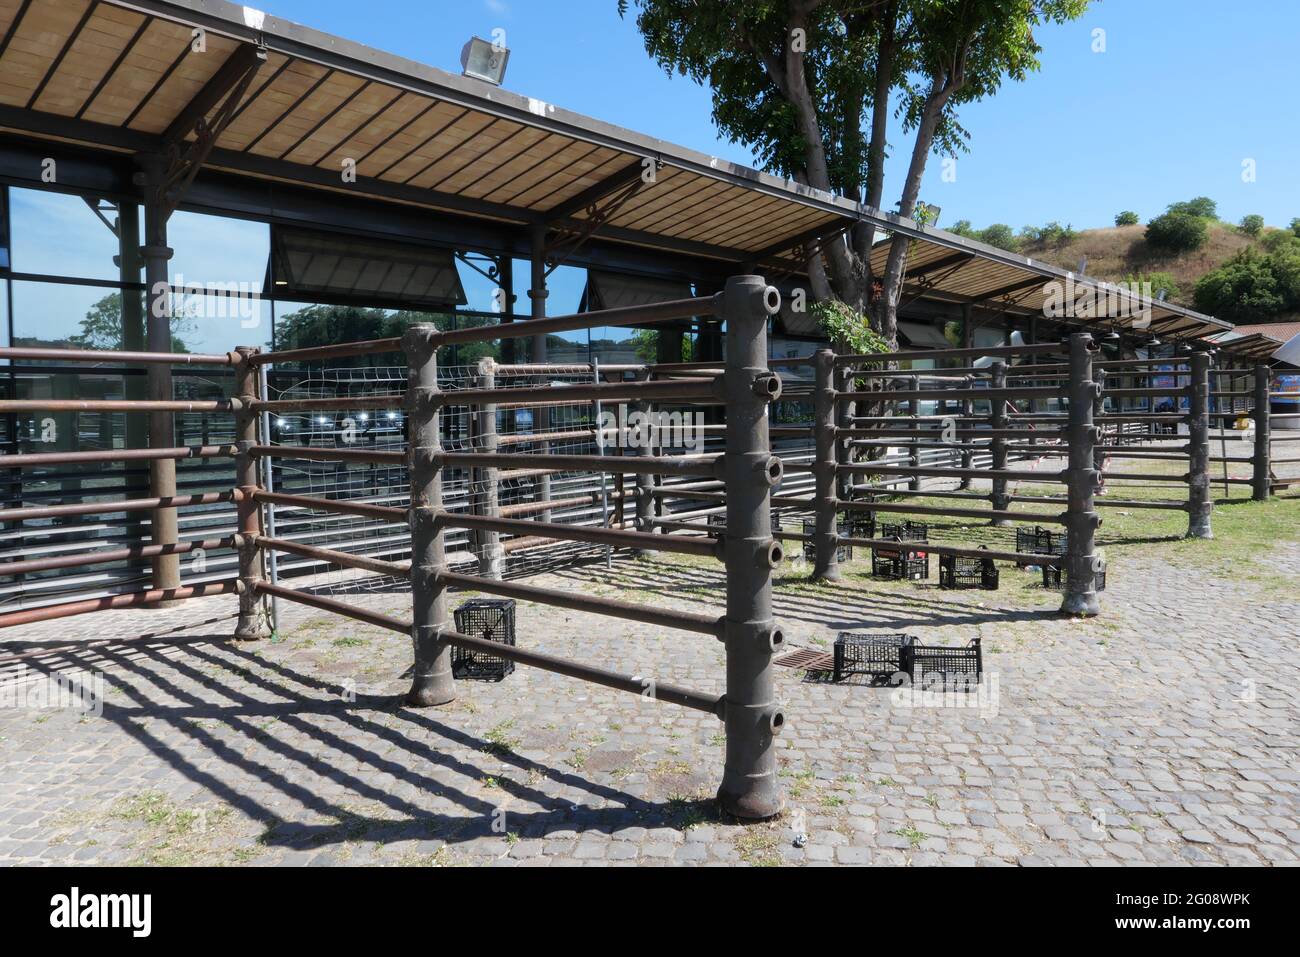 ENCLOSURES FOR ANIMALS INSIDE THE FORMER SLAUGHTERHOUSE Stock Photo